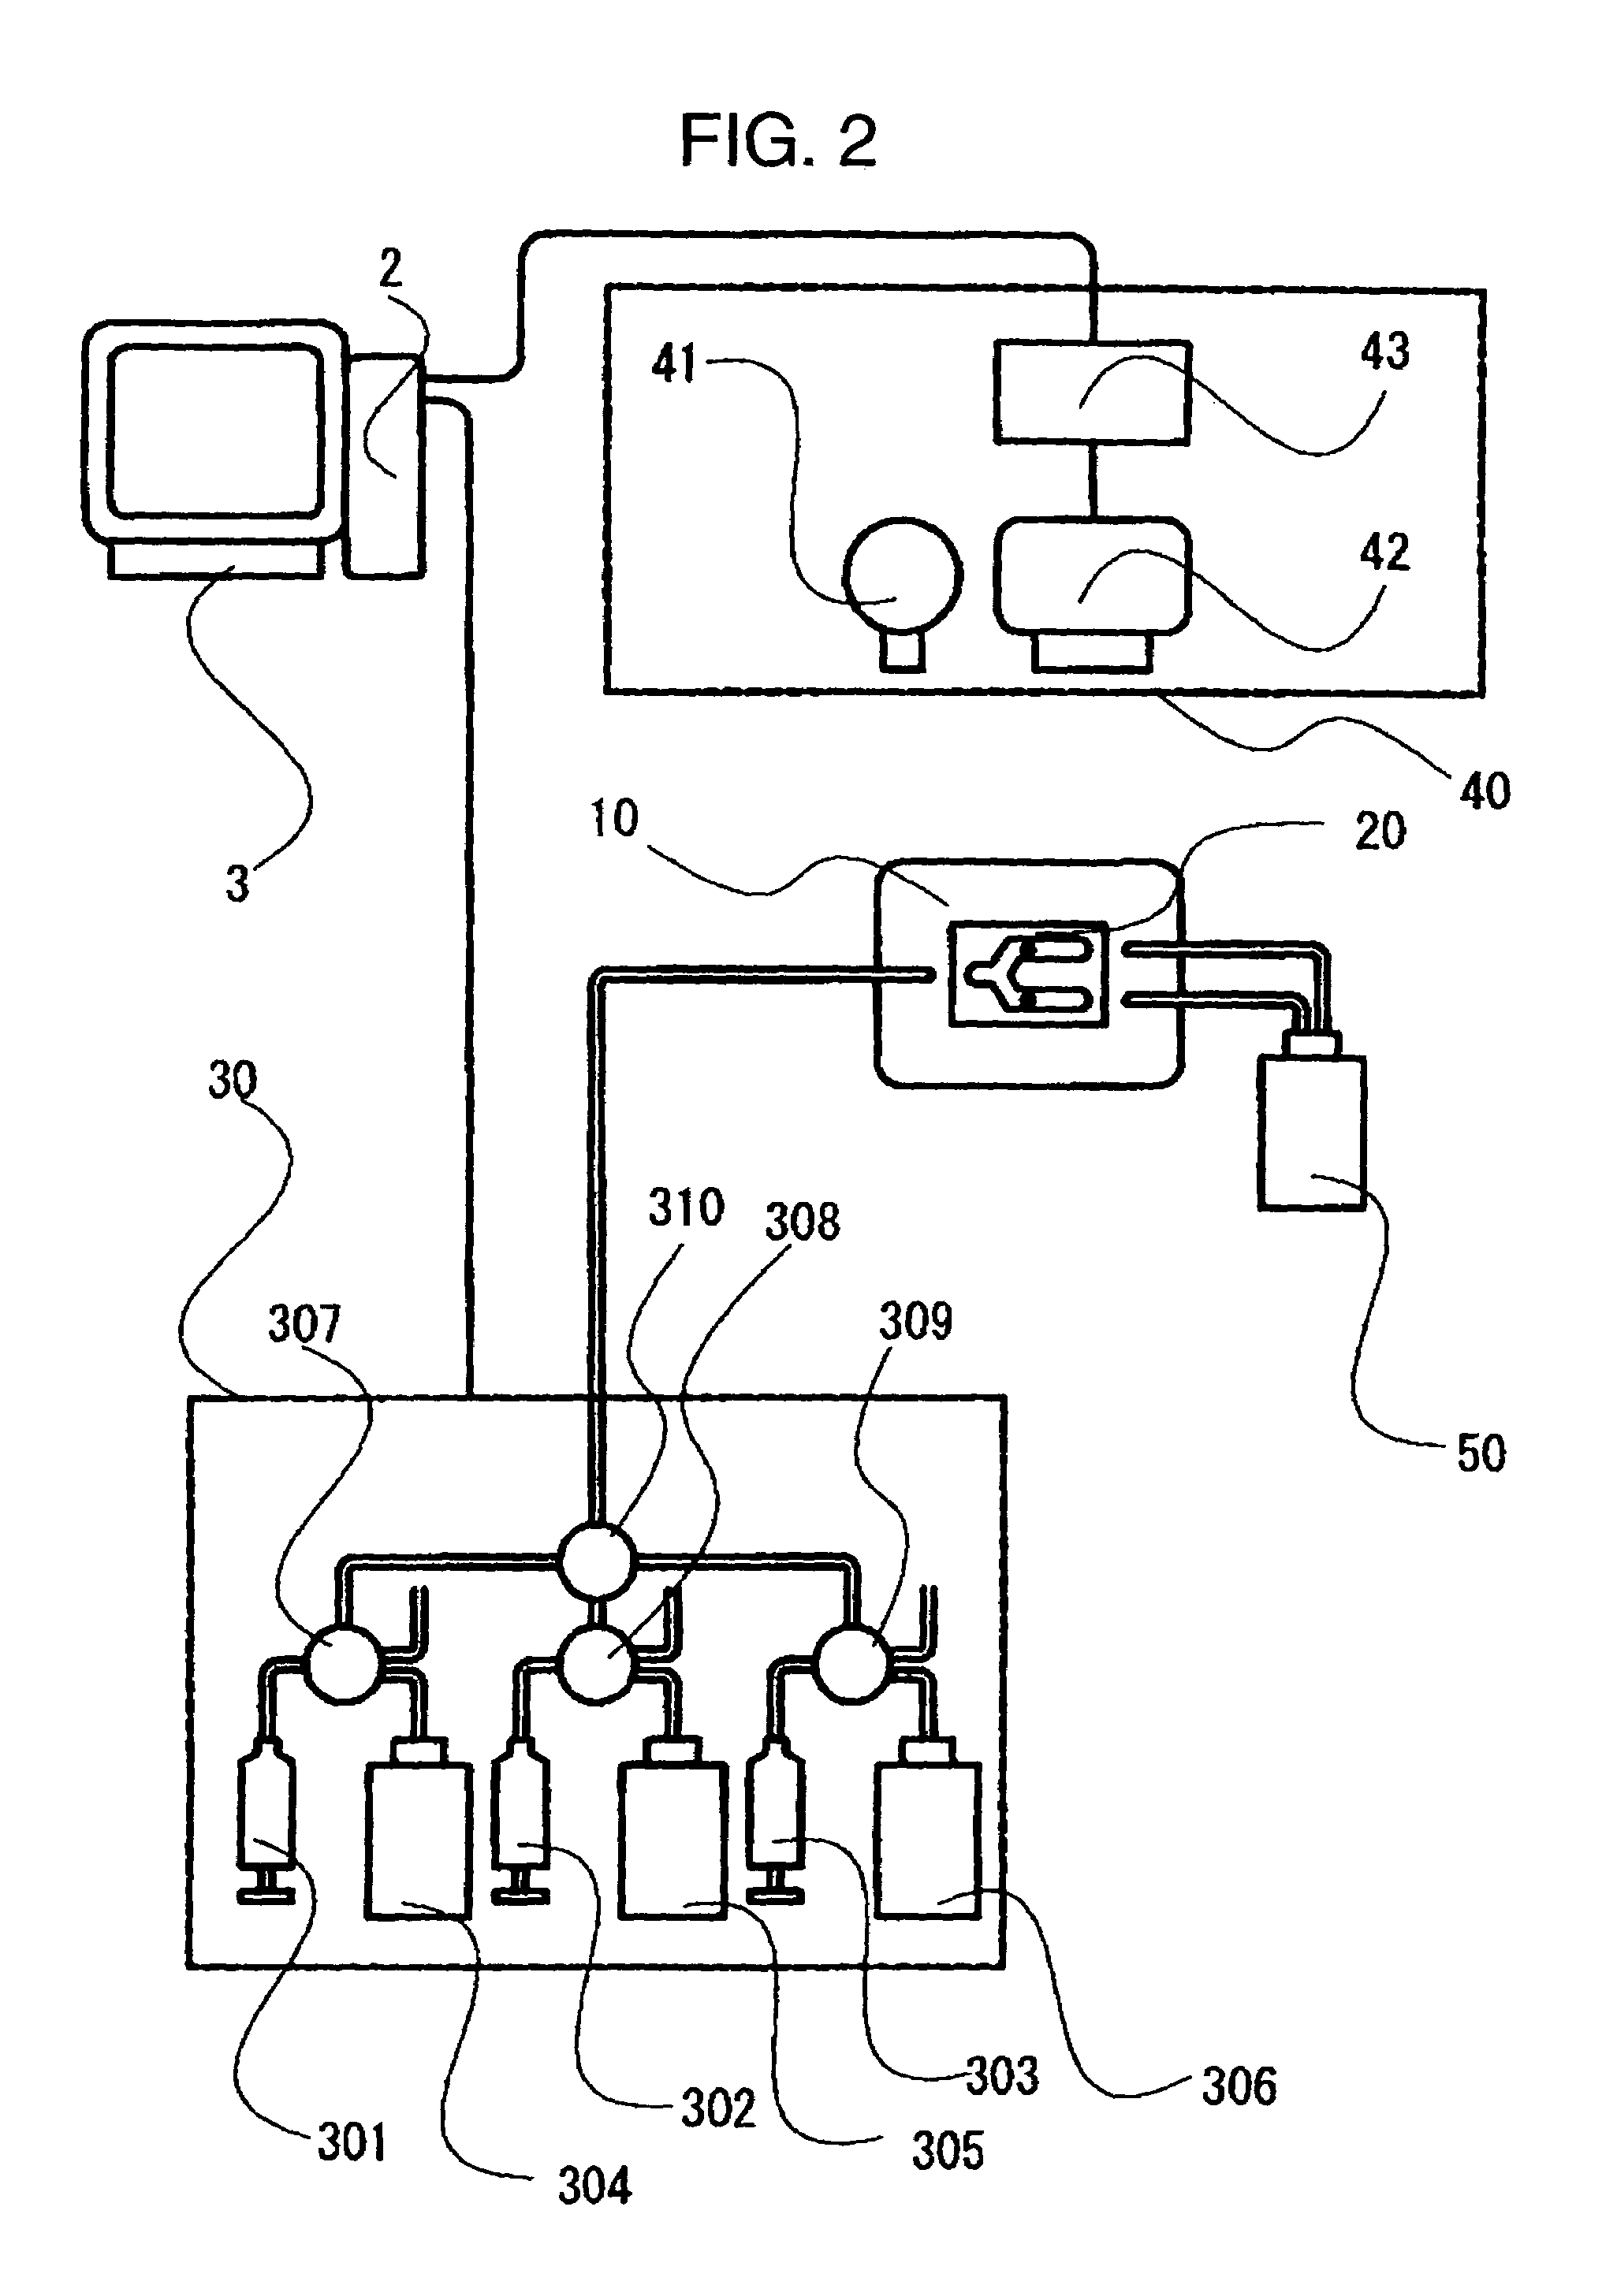 Chips, and apparatus and method for reaction analysis